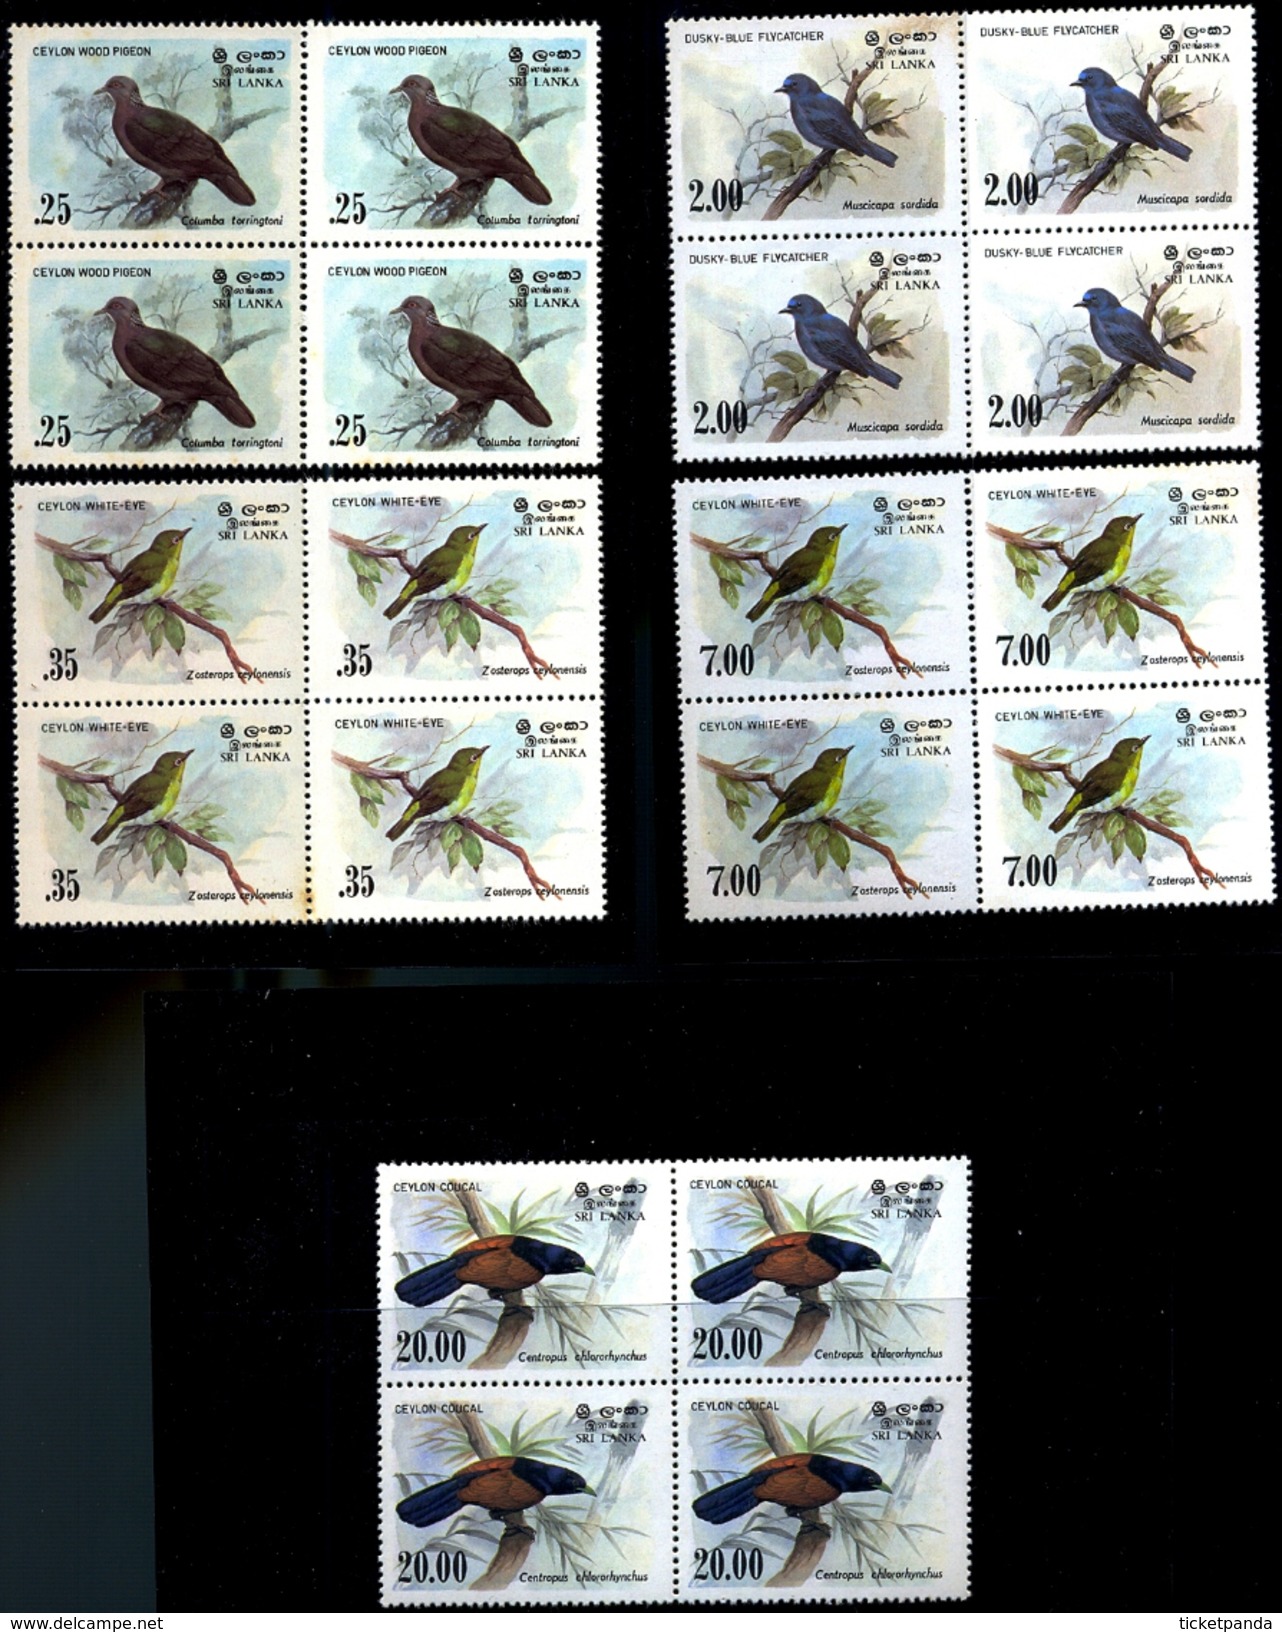 BIRDS OF CEYLON WOOD PIGEON, WHITE EYE, FLYCATCHER& COUCAL-SET OF 5 IN BLOCKS OF 4-MNH-H1-201 - Cuckoos & Turacos